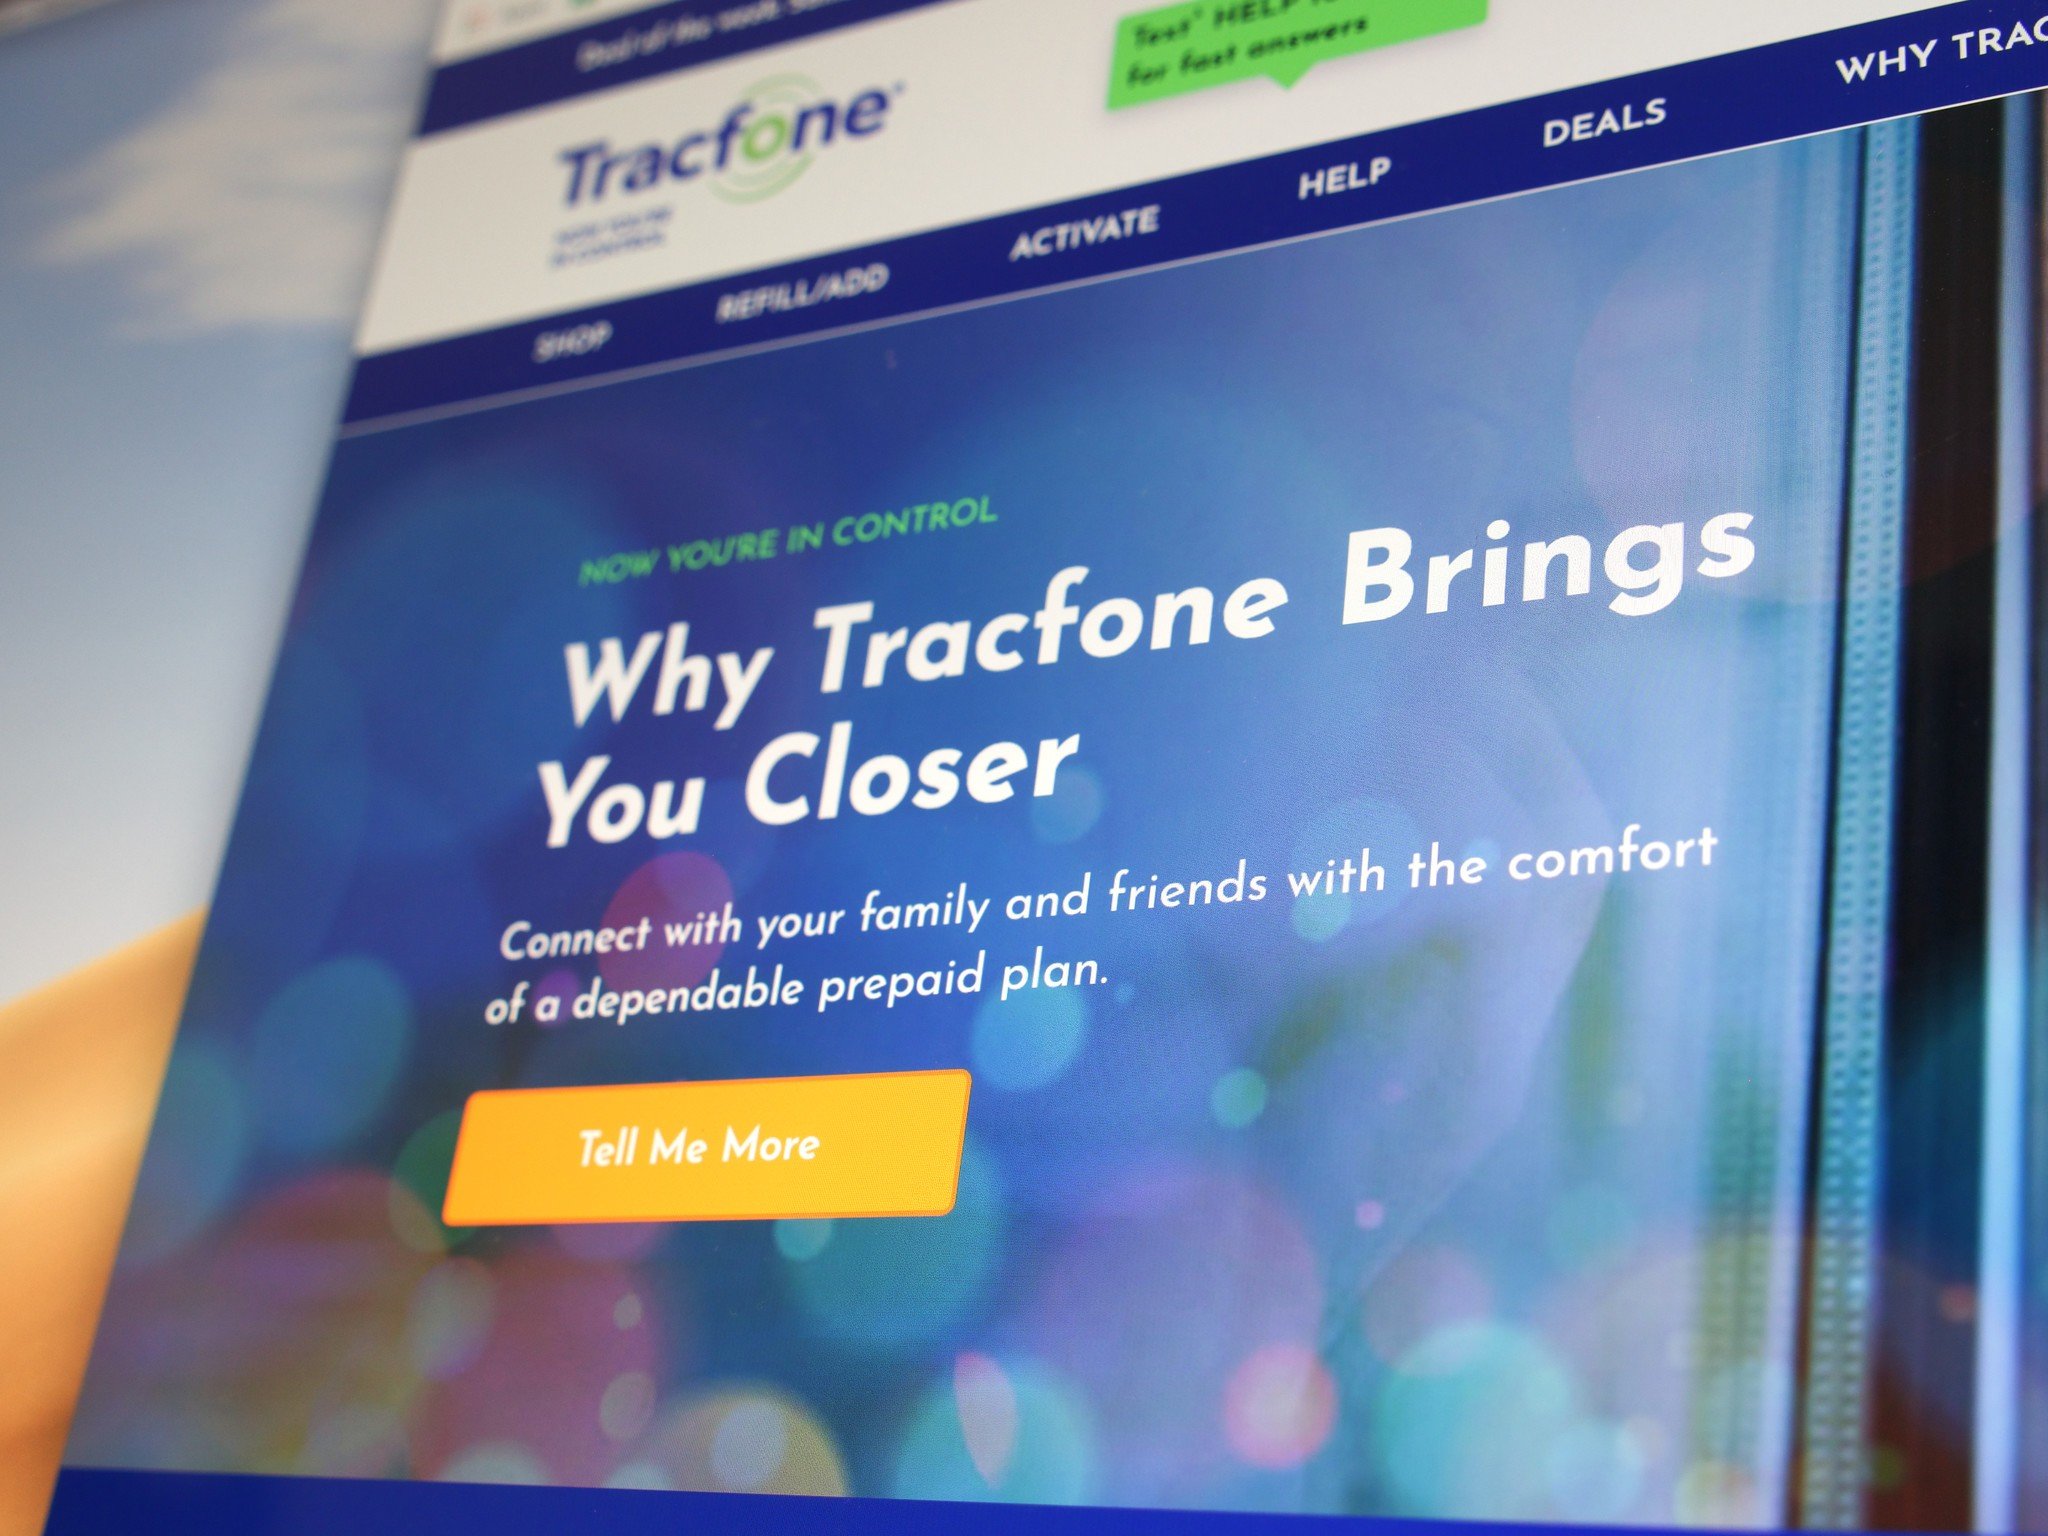 https://www.androidcentral.com/sites/androidcentral.com/files/styles/large_wm_brw/public/article_images/2019/10/tracfone-website-hero-2019-joe.jpg